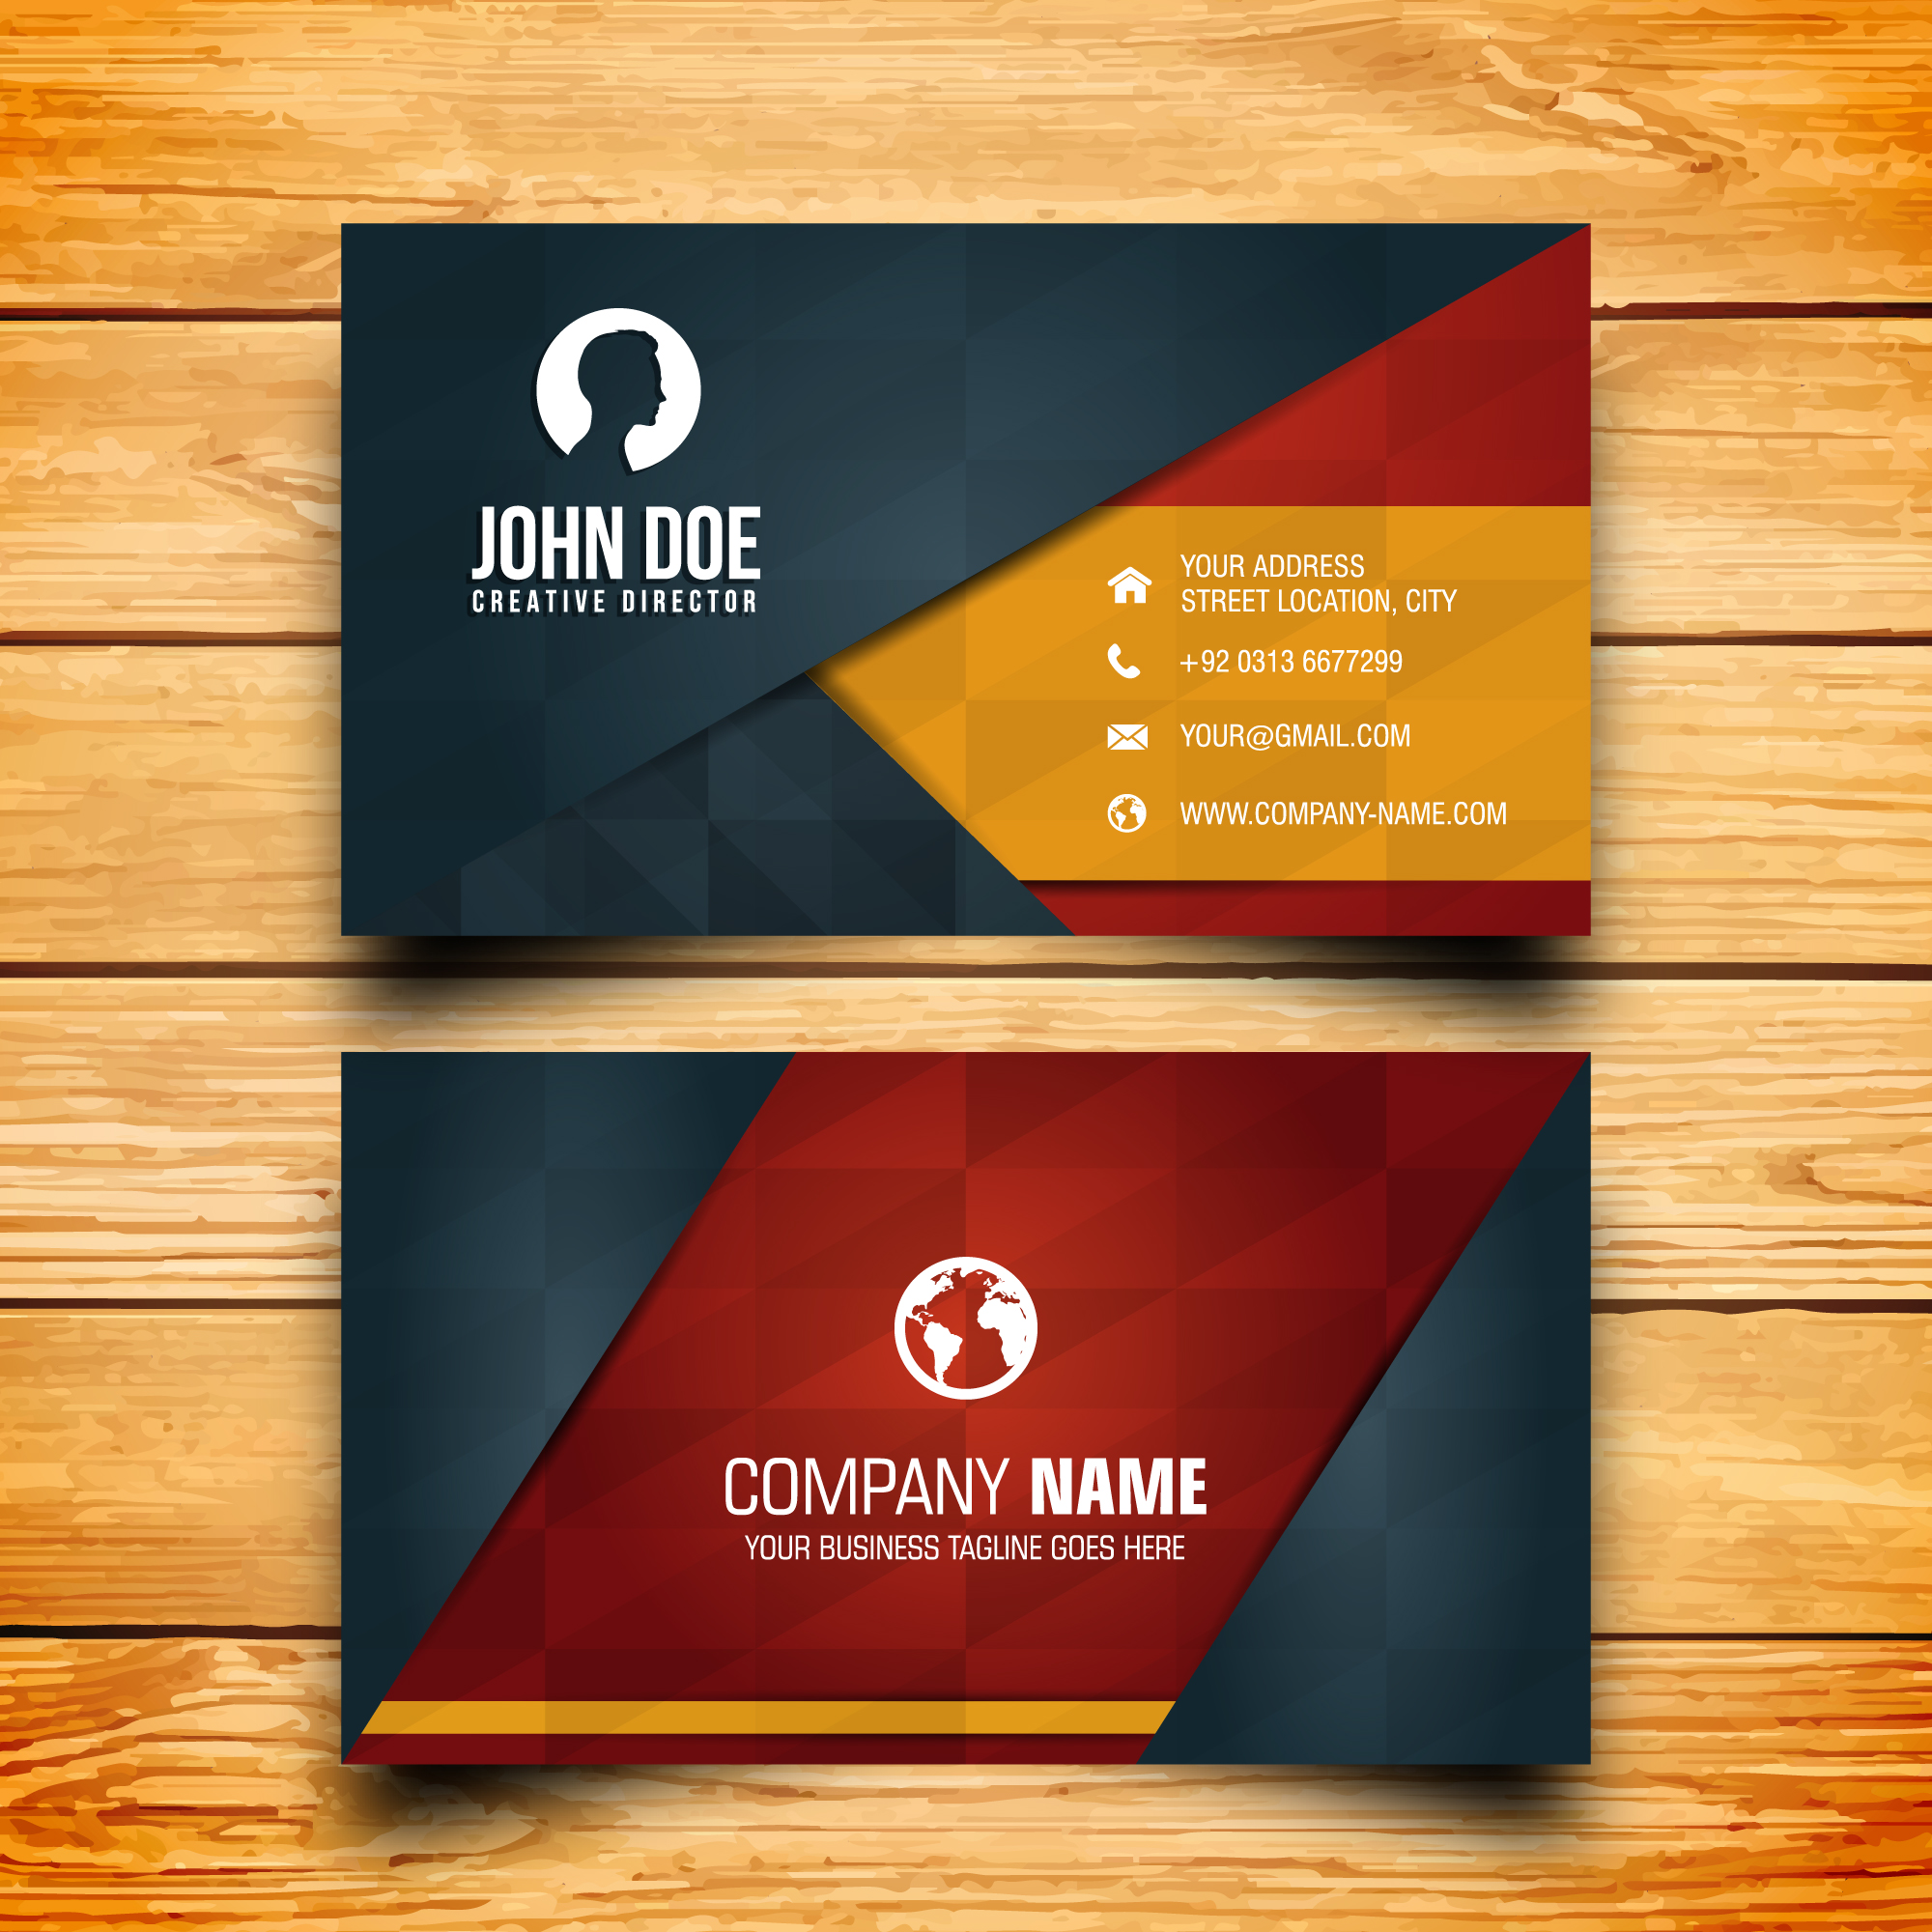 2-professional-business-card-design-for-5-seoclerks